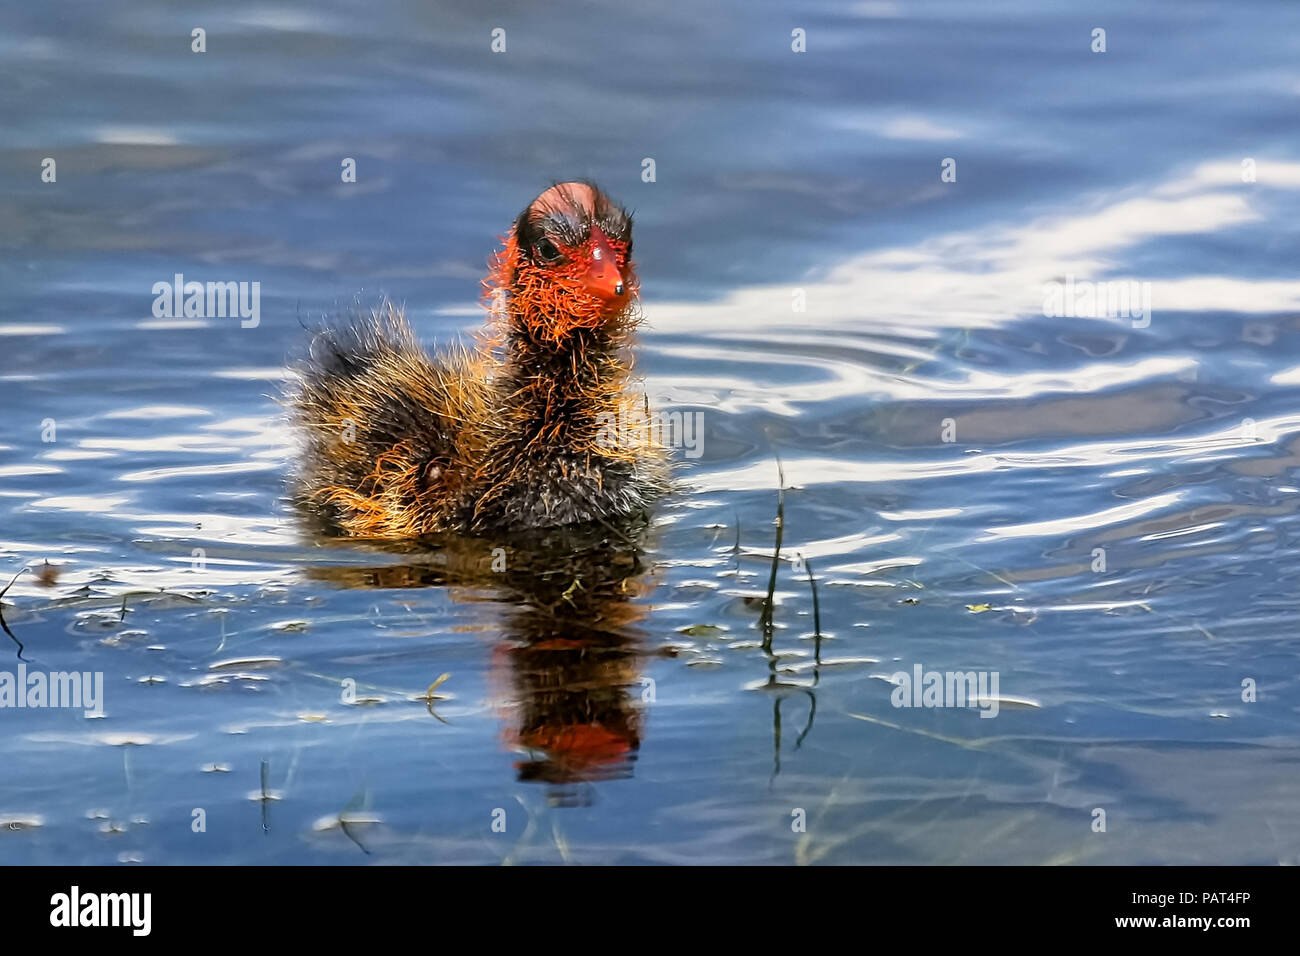 Closeup of an American Coot chick in water Stock Photo